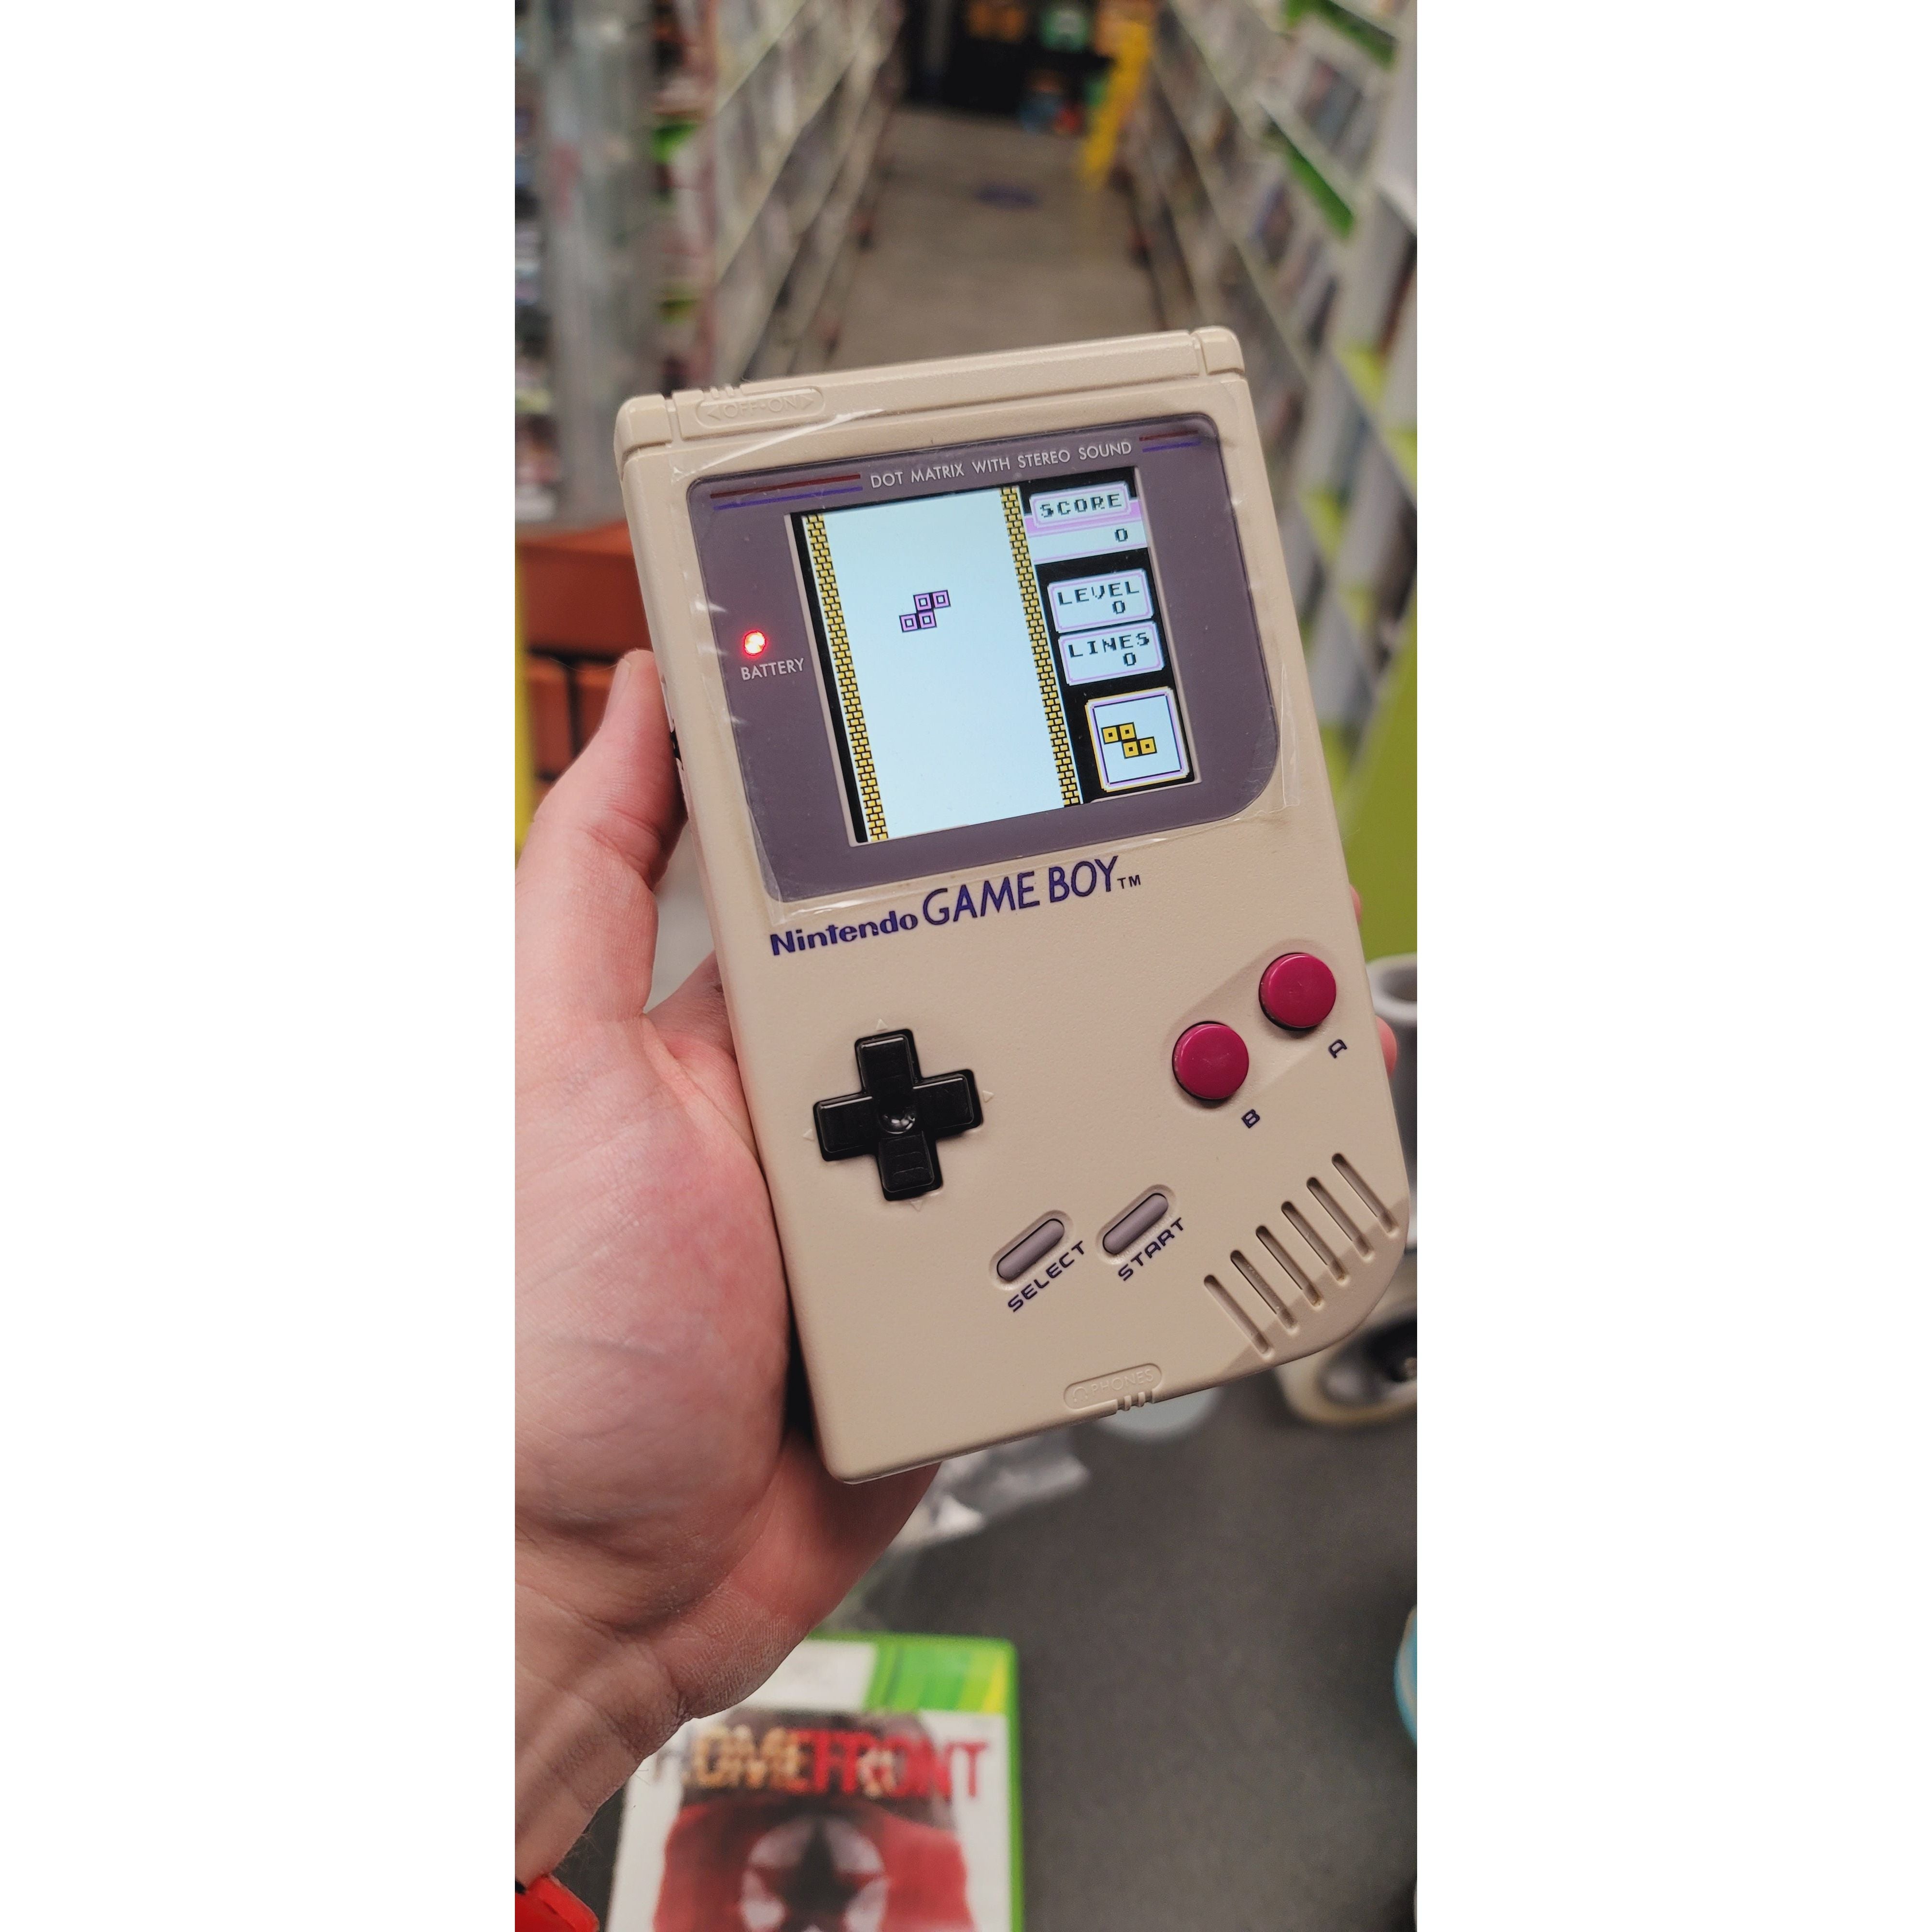 Game Boy Classic System with IPS LCD Screen and On Screen Display